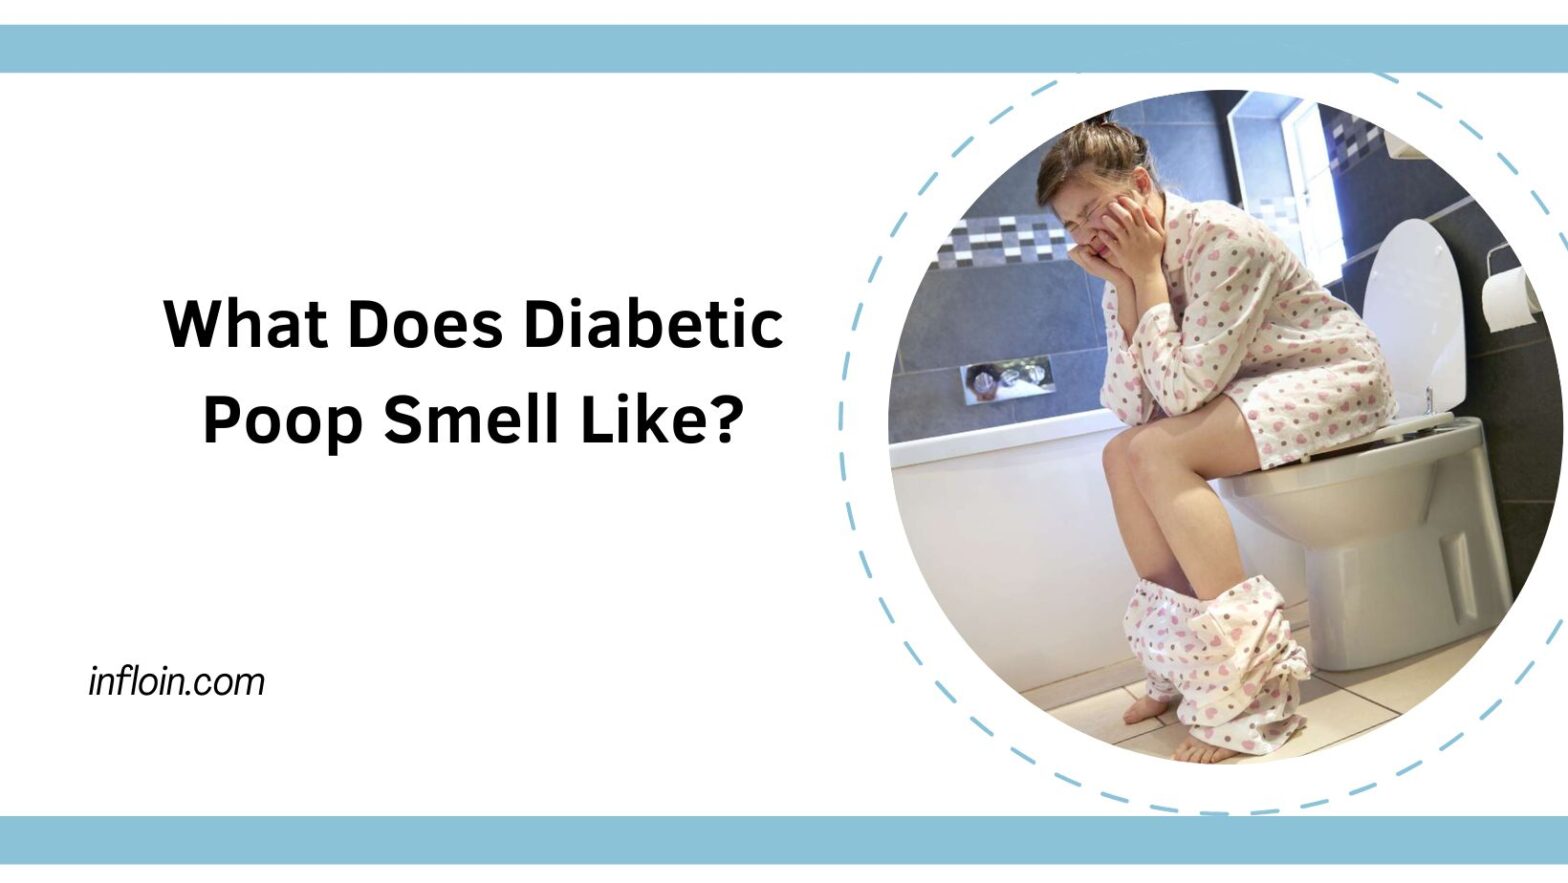 What Does Diabetic Poop Smell Like